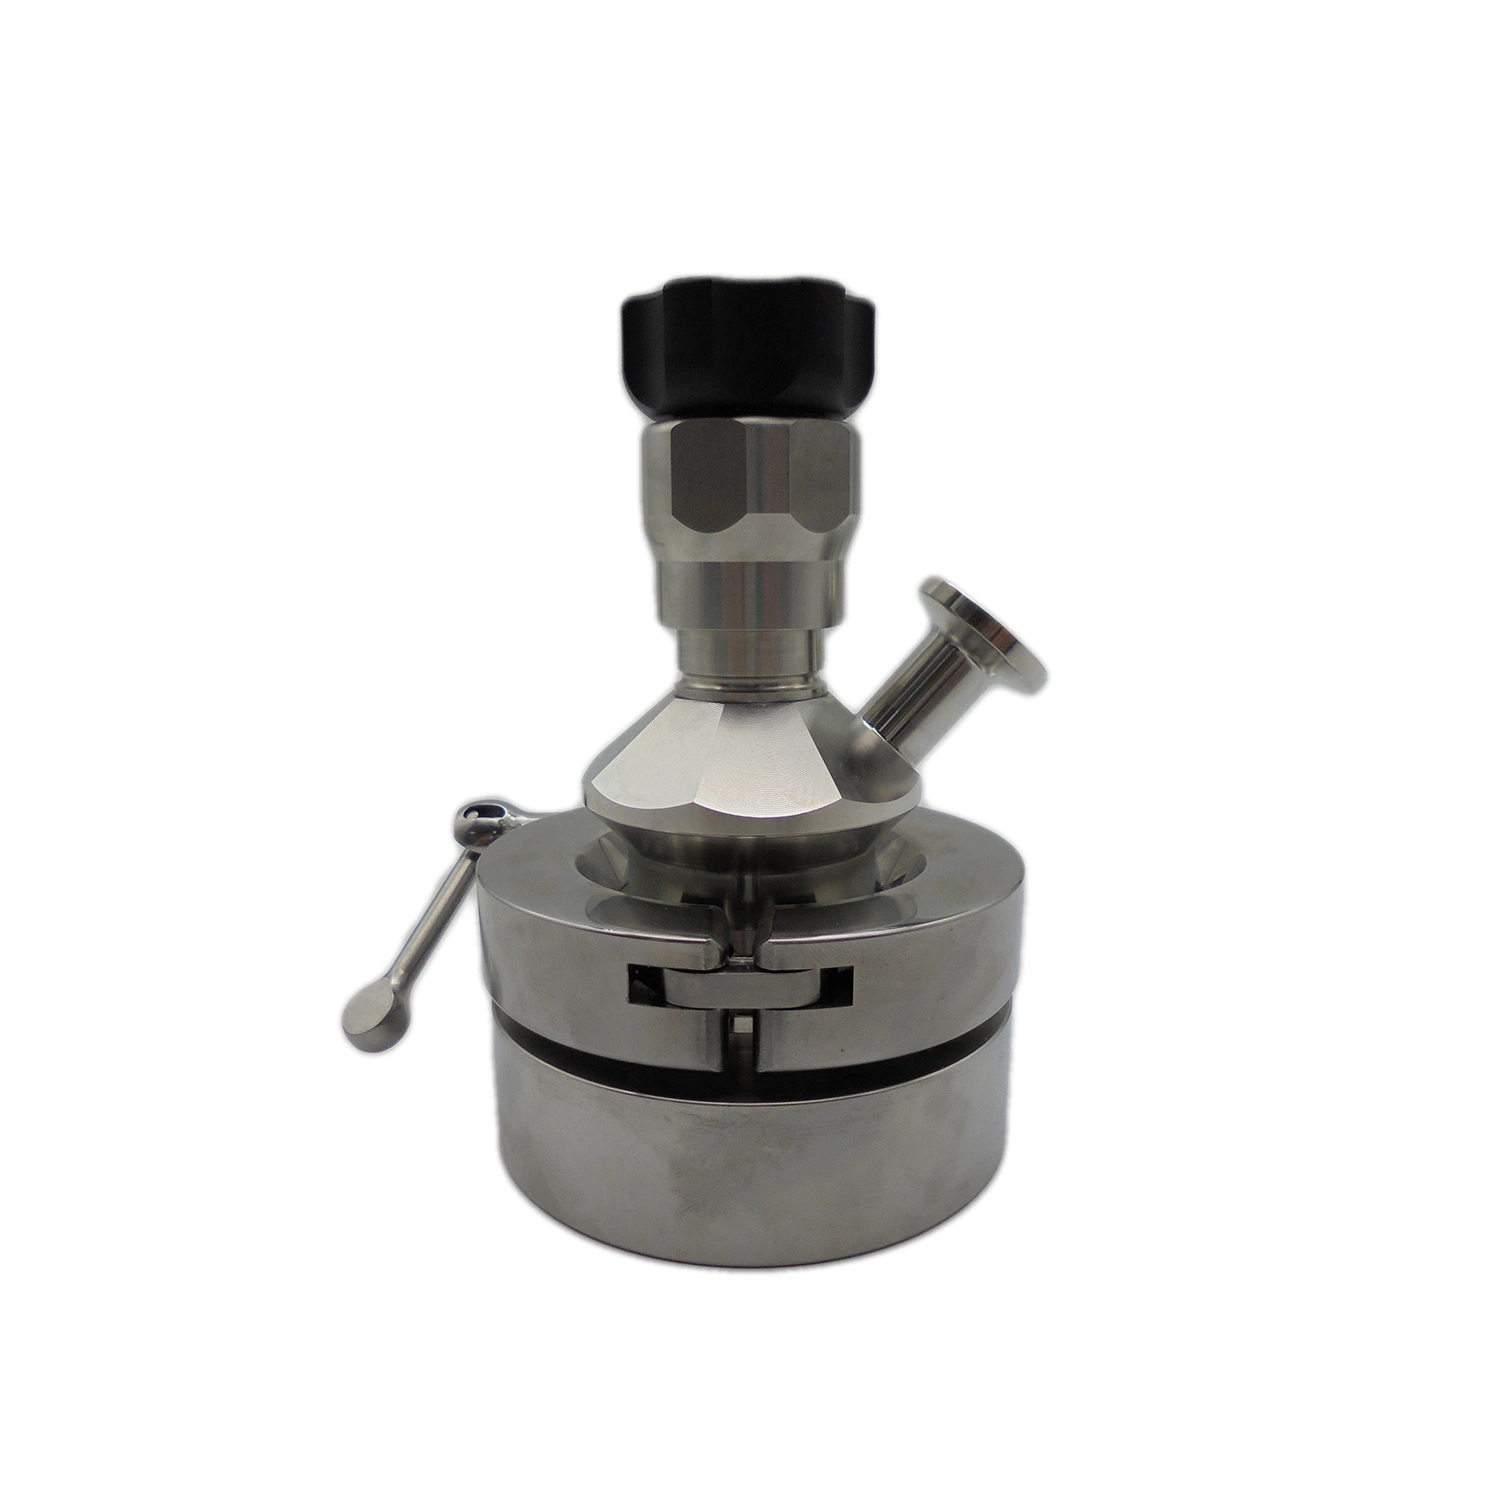 Sanitary Stainless Steel Aseptic Sampling Valve with Aseptic Flange